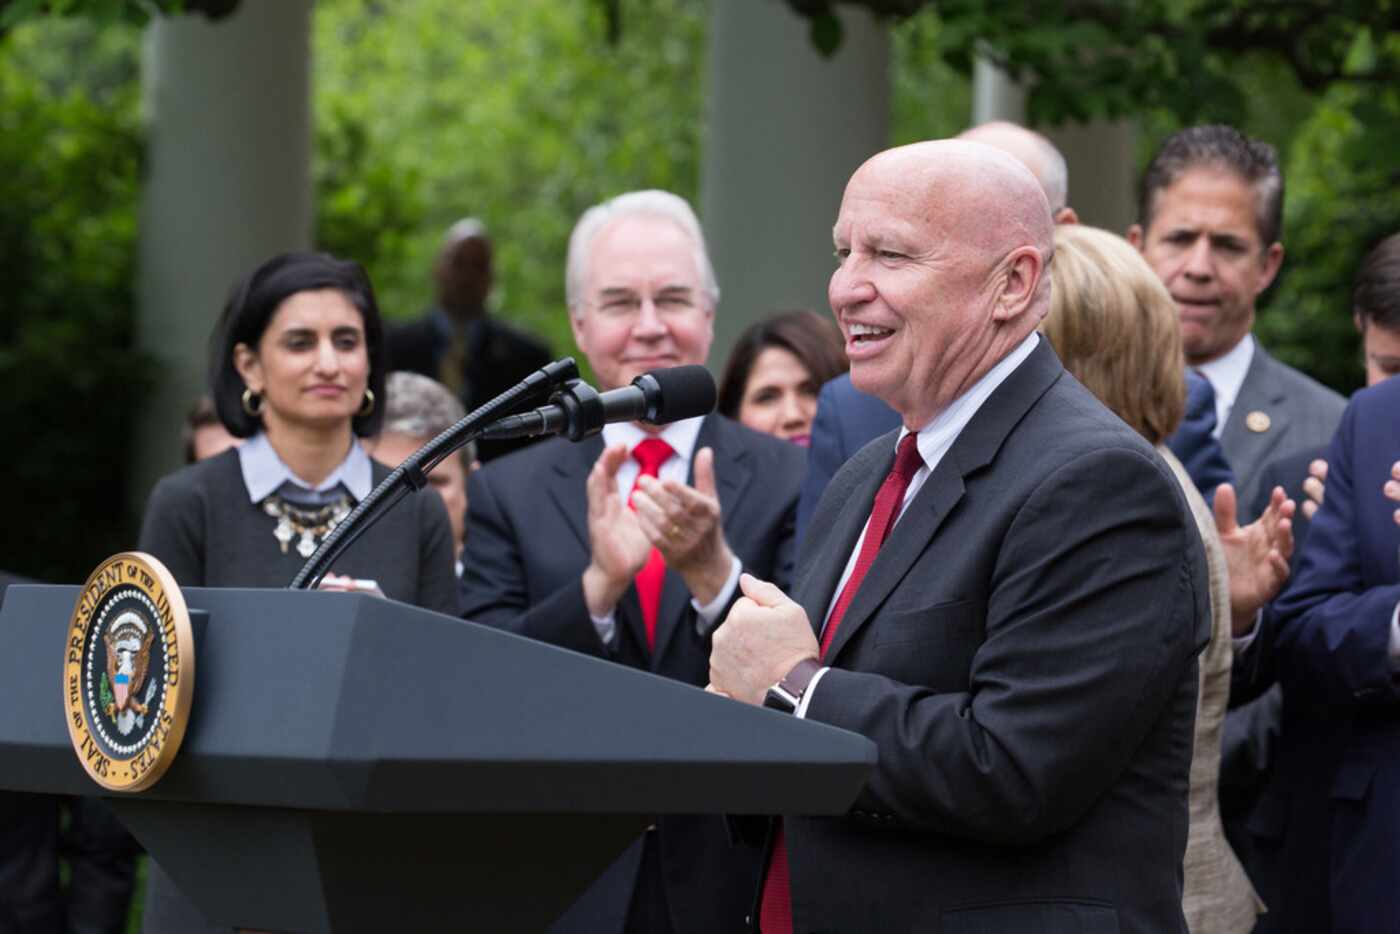 Rep. Kevin Brady, R-The Woodlands, said Democrats are "weaponizing the tax code" by seeking...